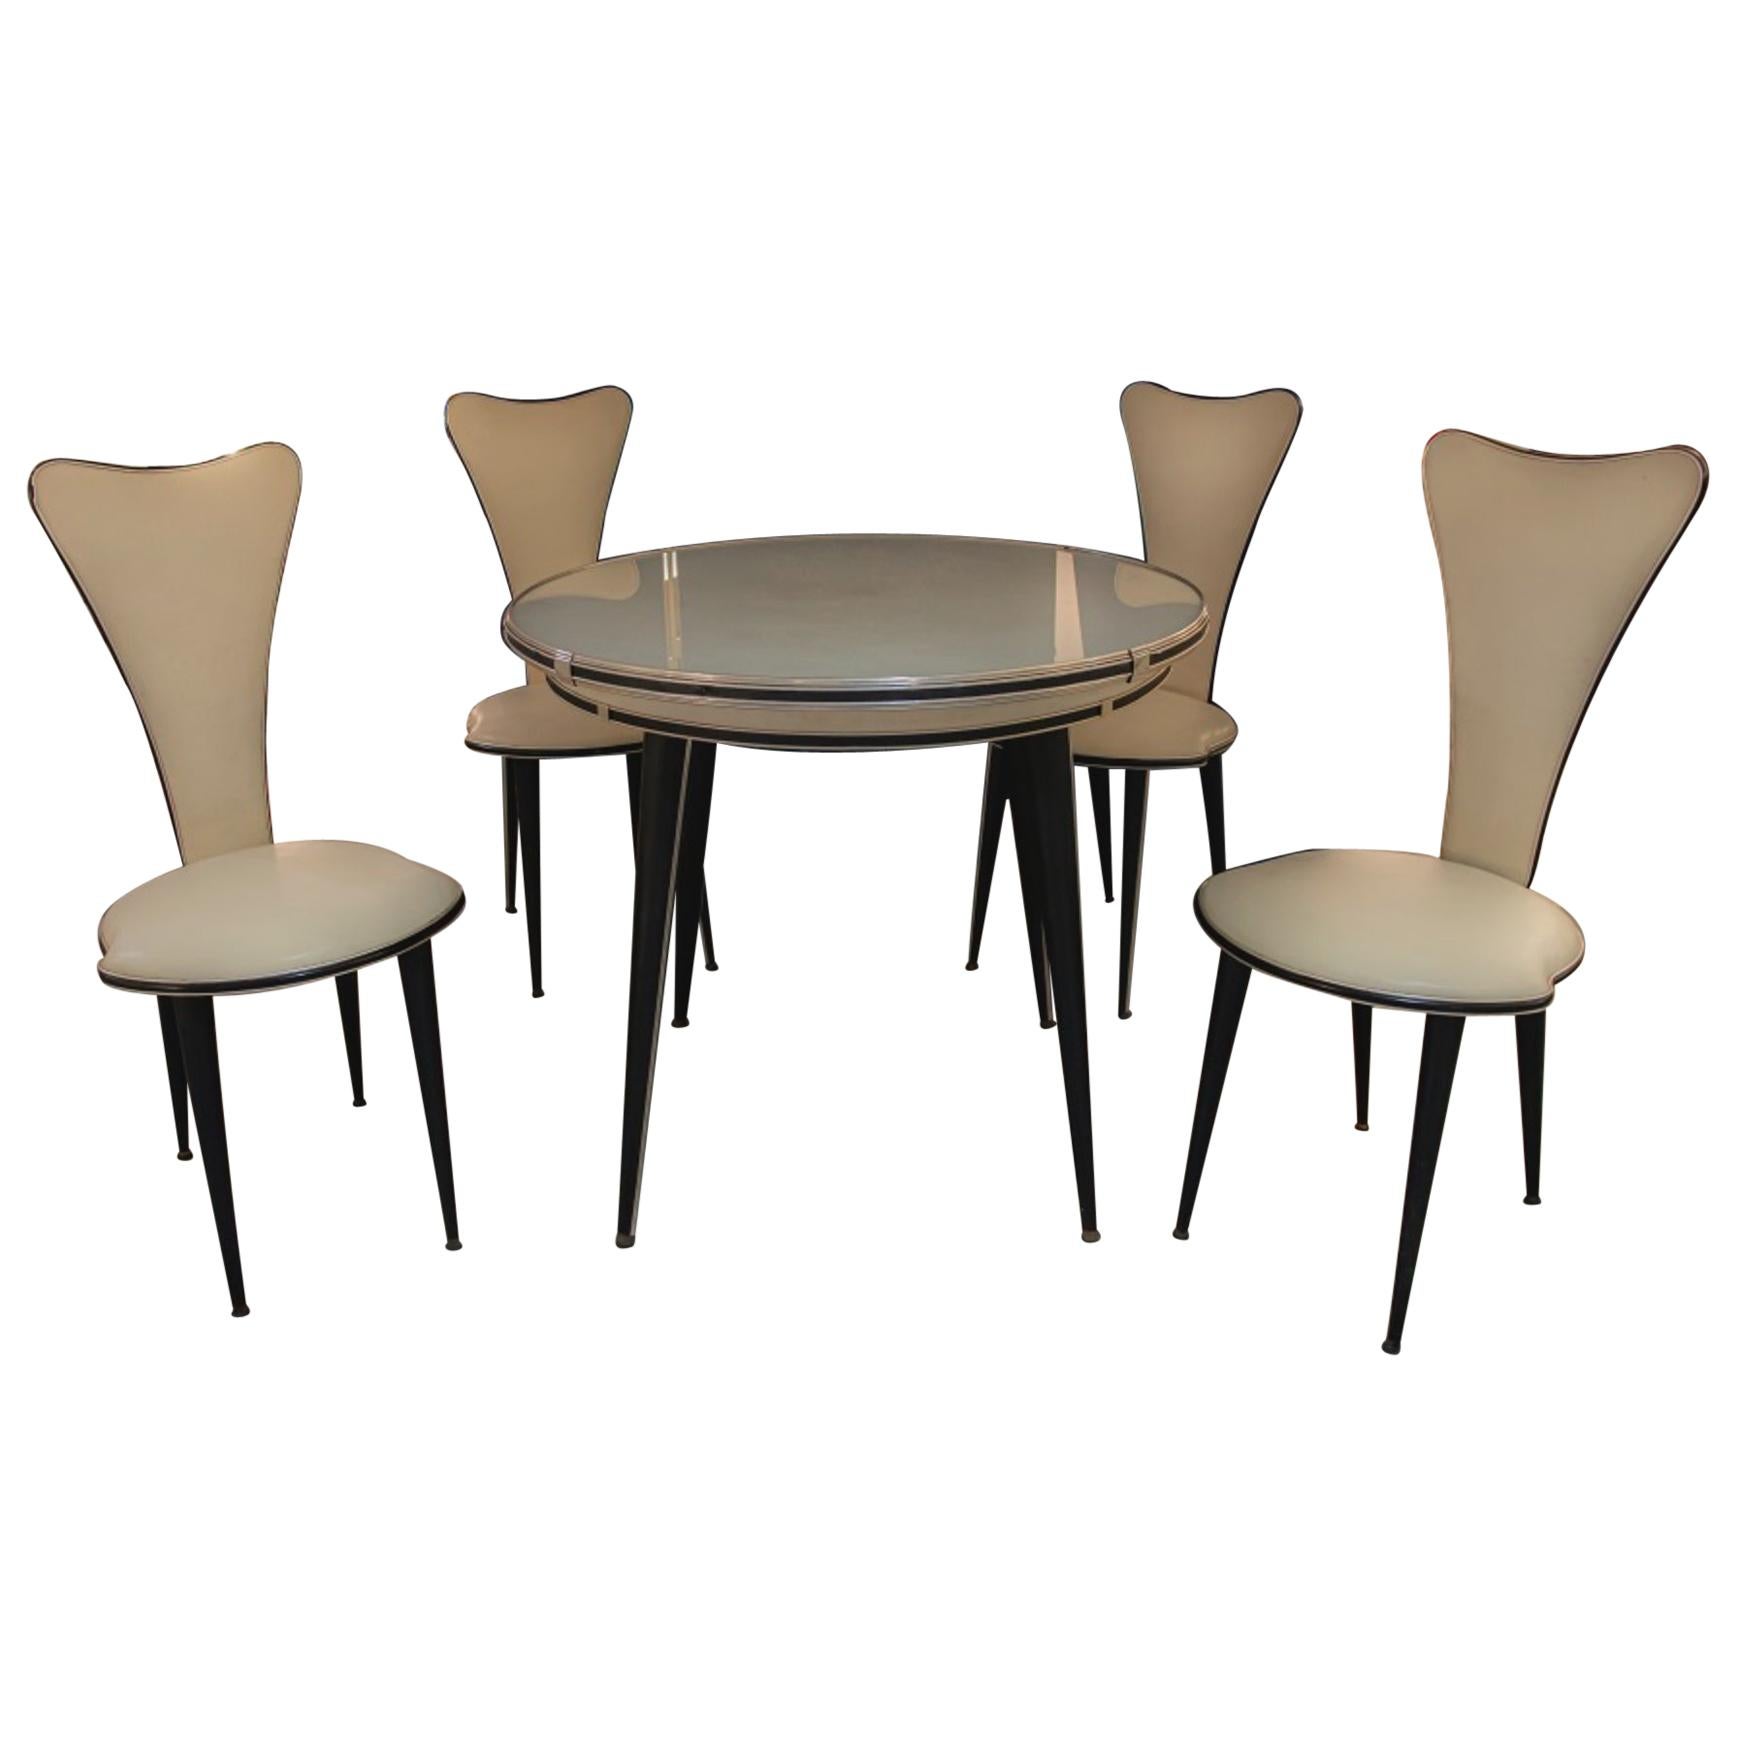 Vintage Set of Table and Chairs by Umberto Mascagni, 1960s